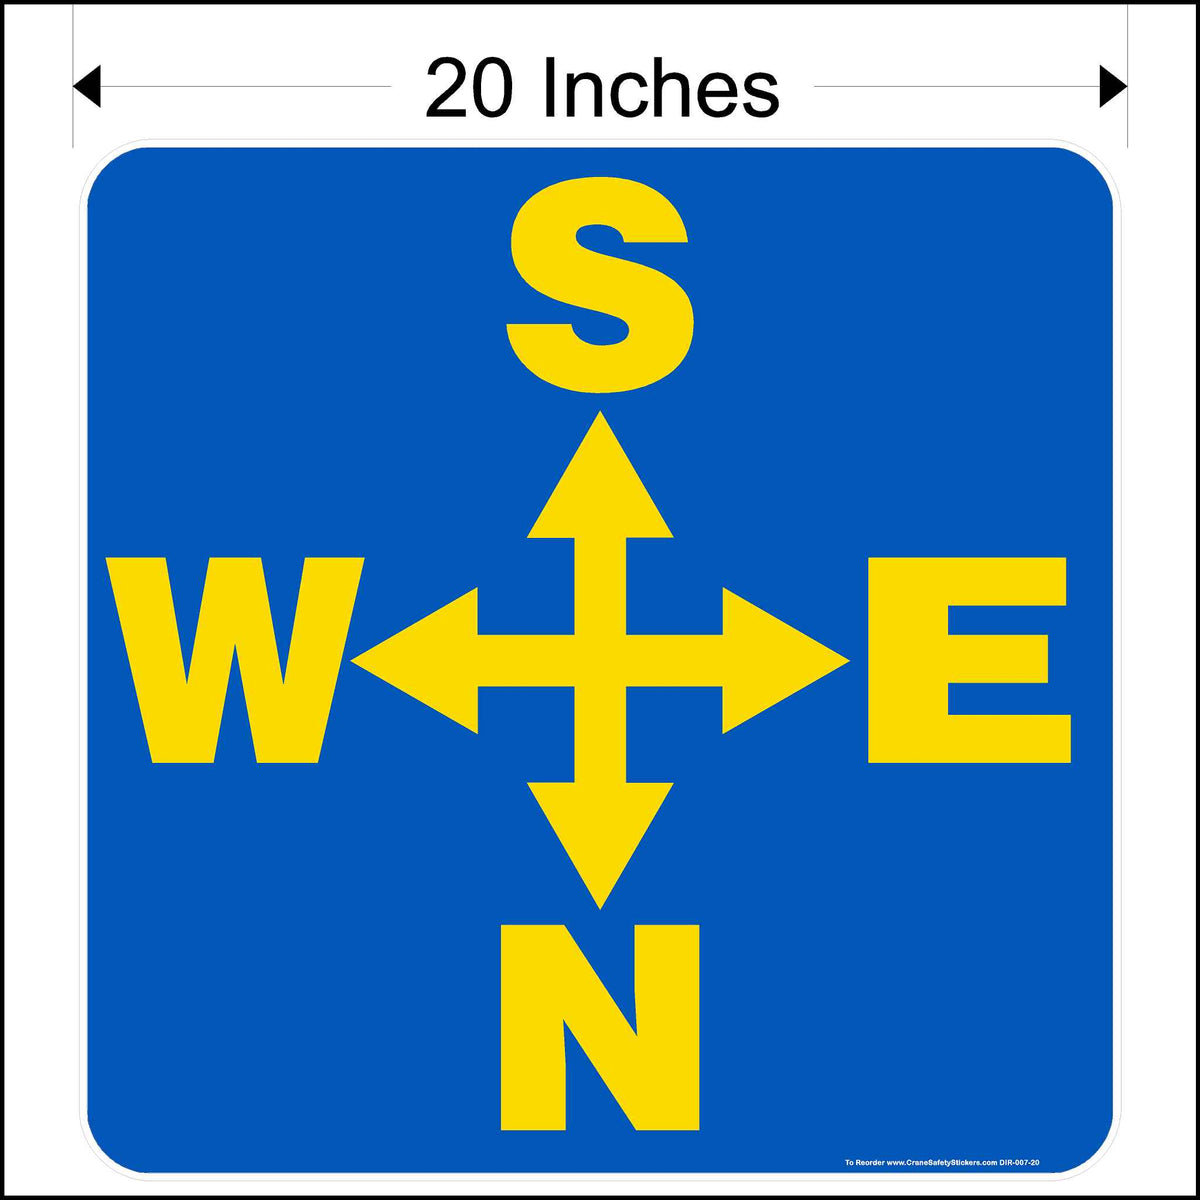 Twenty inch overhead crane decal printed with yellow south, notrth, east, and west arrows on a blue background.